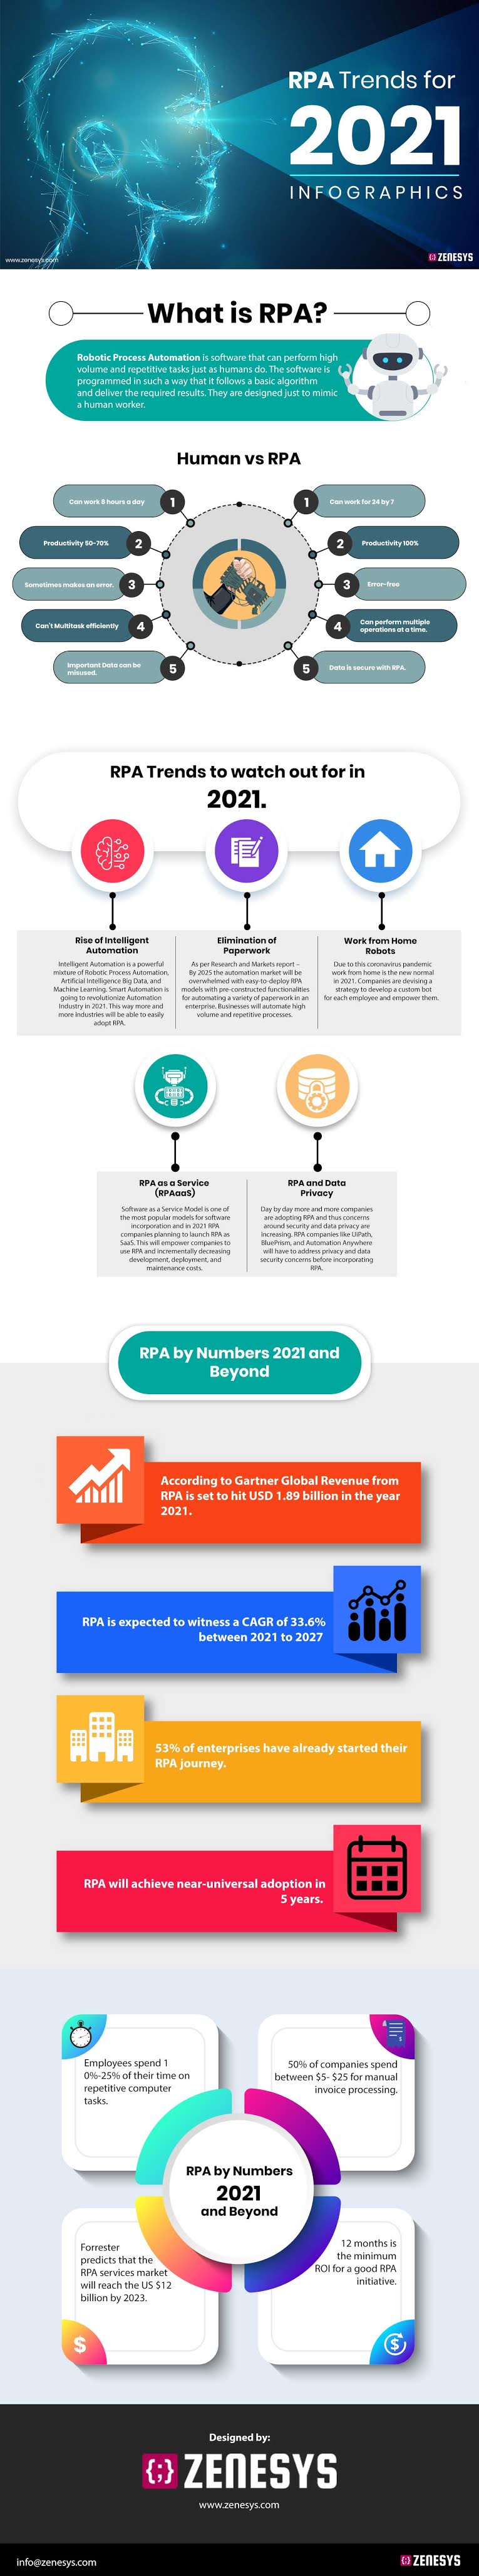 RPA Trends for 2021 #infographic #Automation #Technology #infographics #Trends #RPA Trends #Infographic #Robotic Process